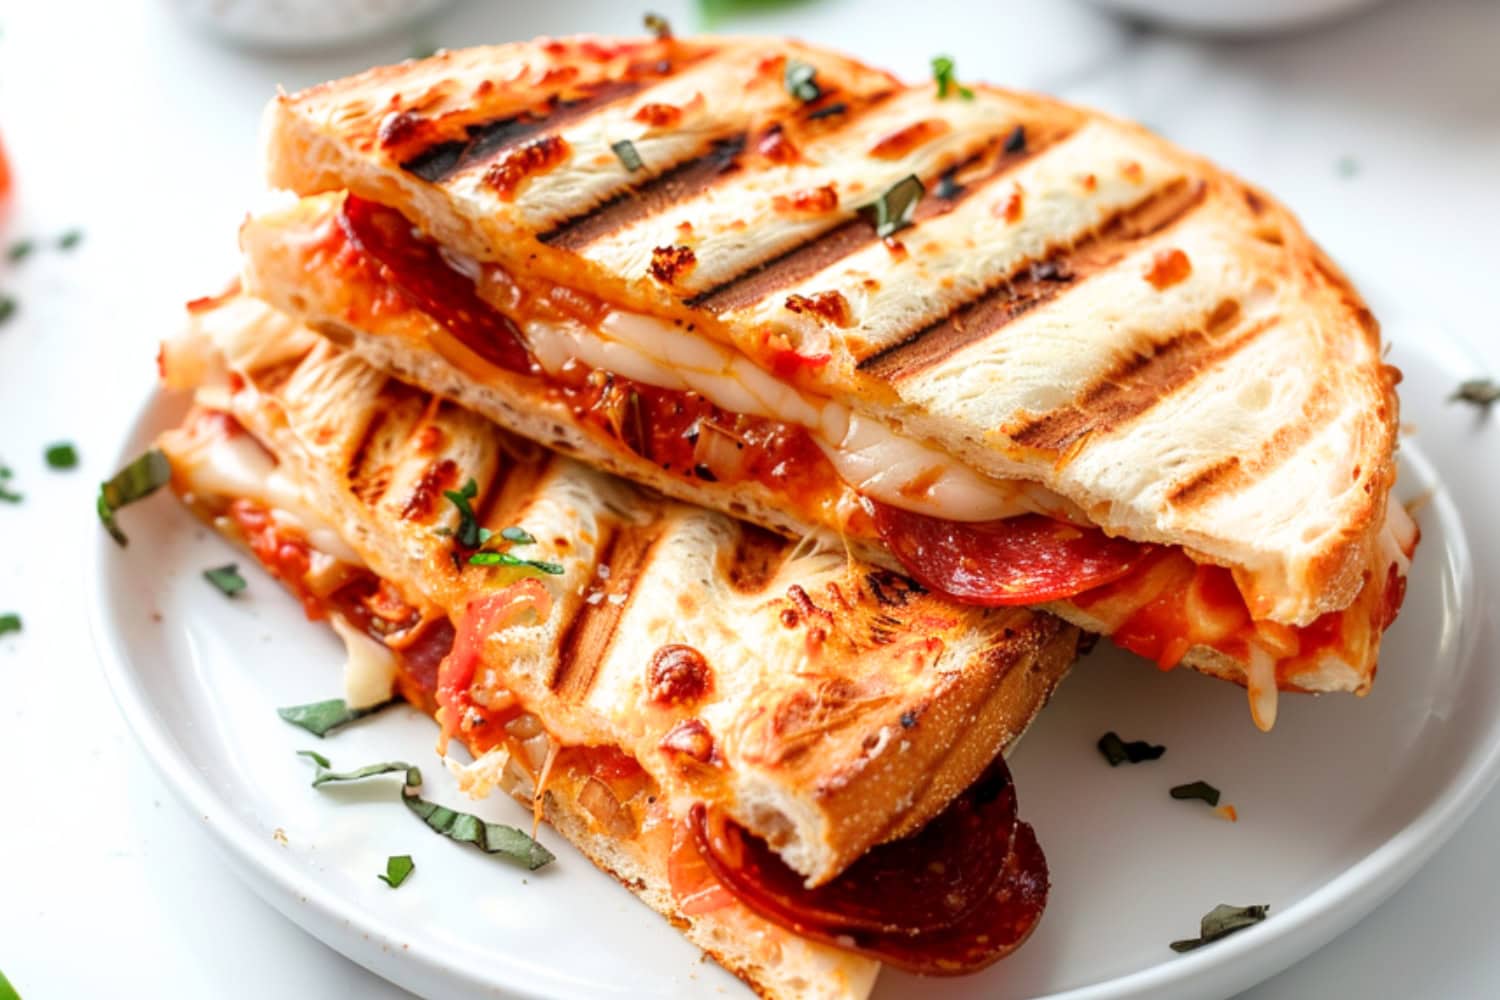 Sandwich with melted mozzarella, spicy pepperoni, and golden brown crust.